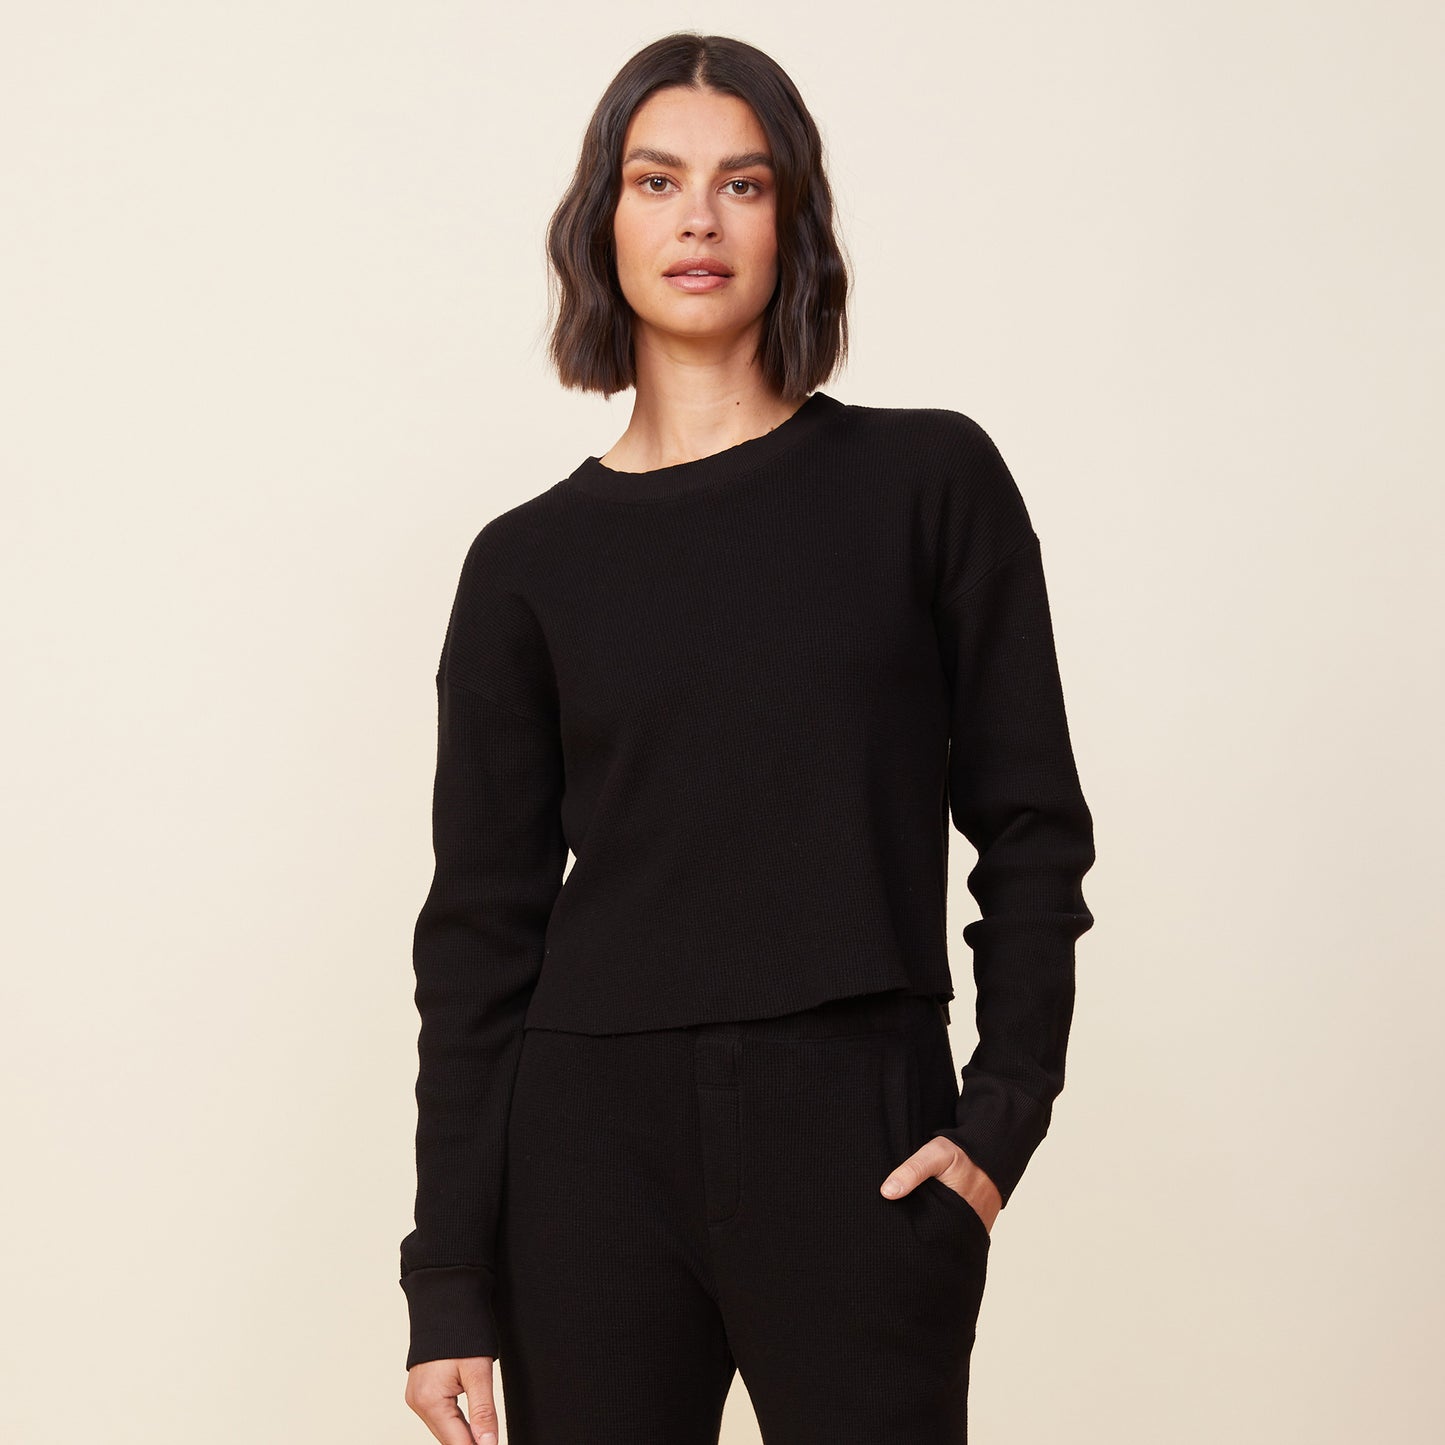 Front view of model wearing the thermal top in black.